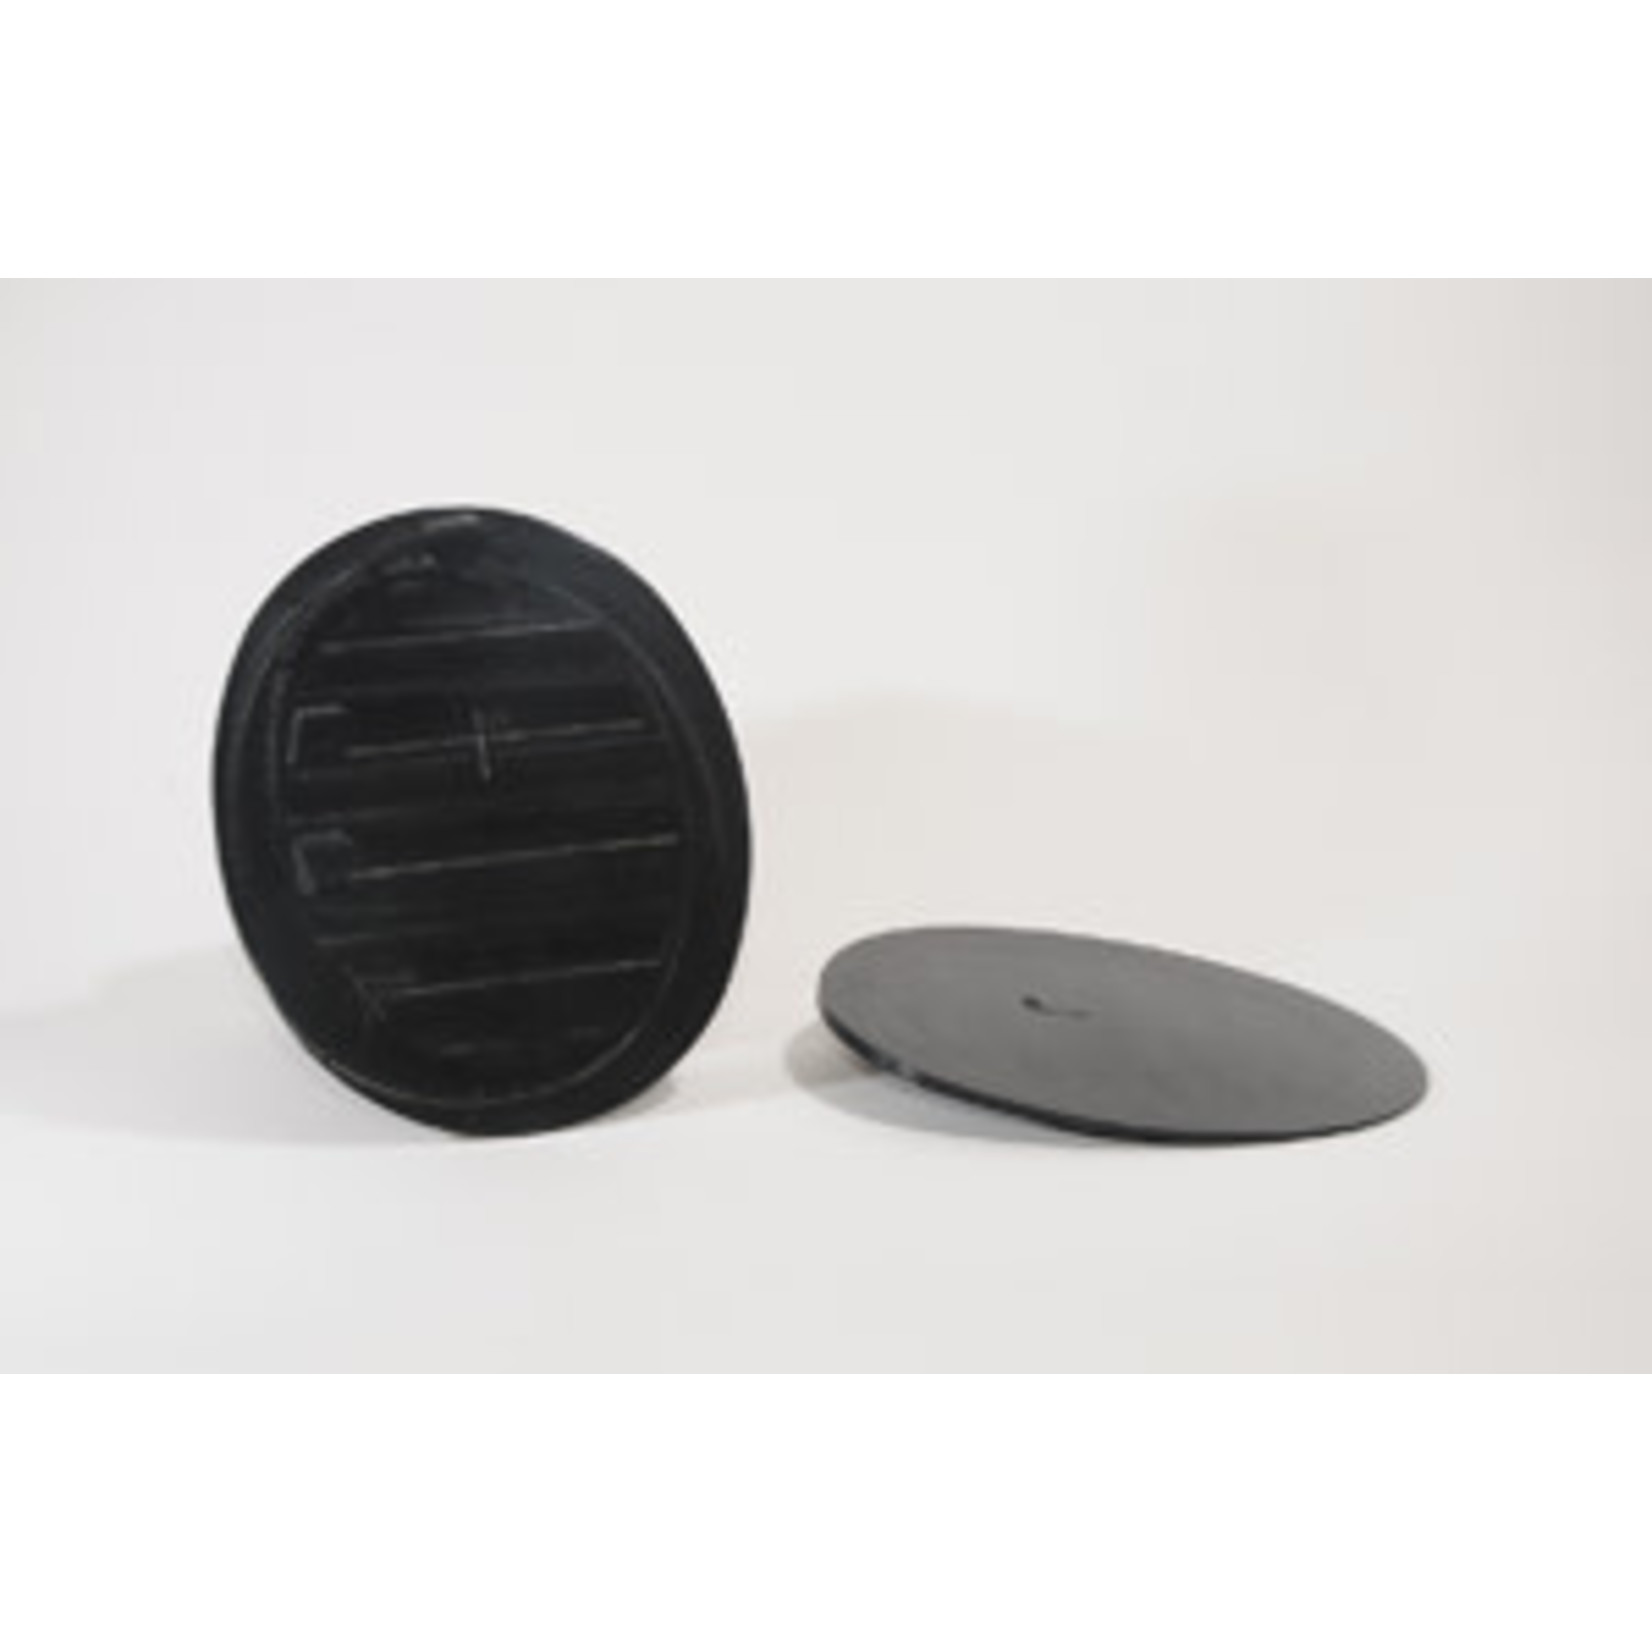 Castle Castle One Degree Oval Pad Pair